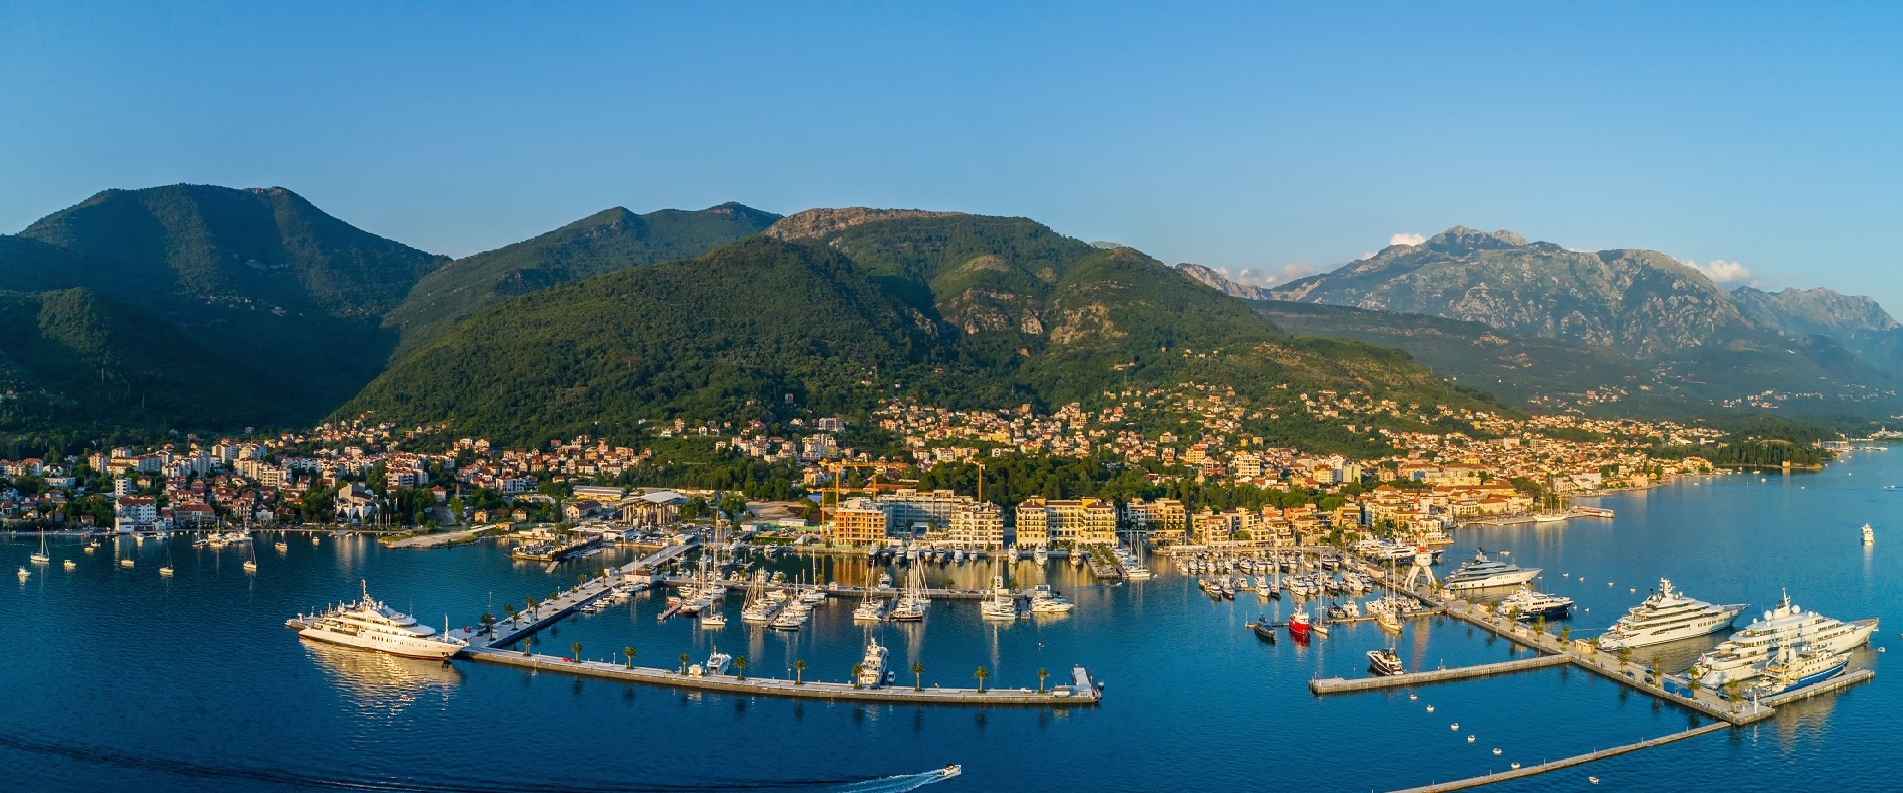 Places to visit in Tivat: everything Porto Montenegro can offer and much more